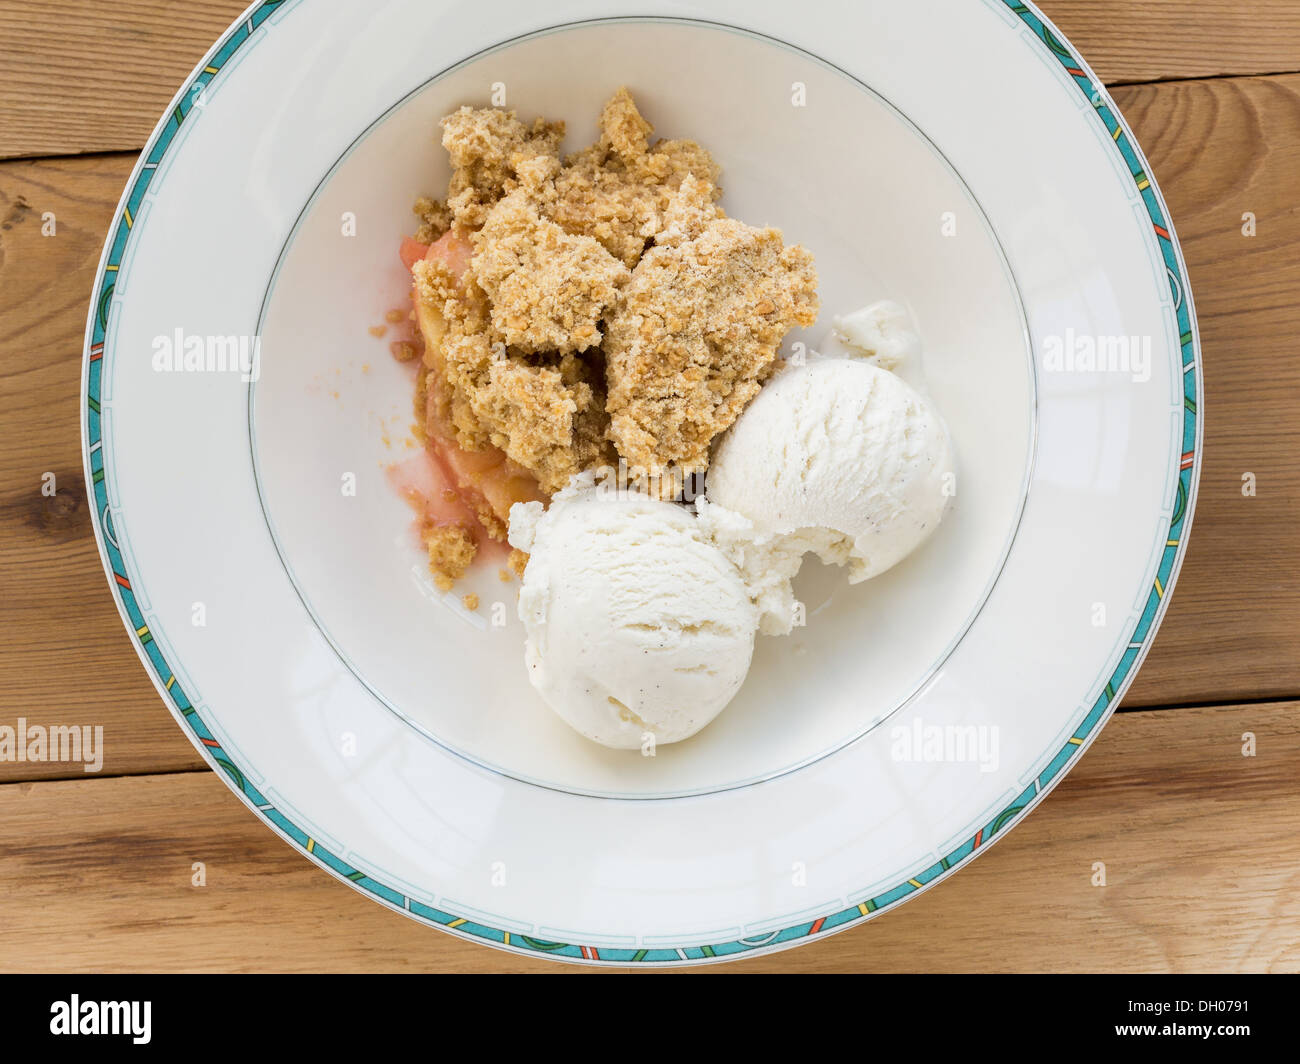 Apple and strawberry crumble and ice cream dessert pudding in a bowl, overhead view Stock Photo